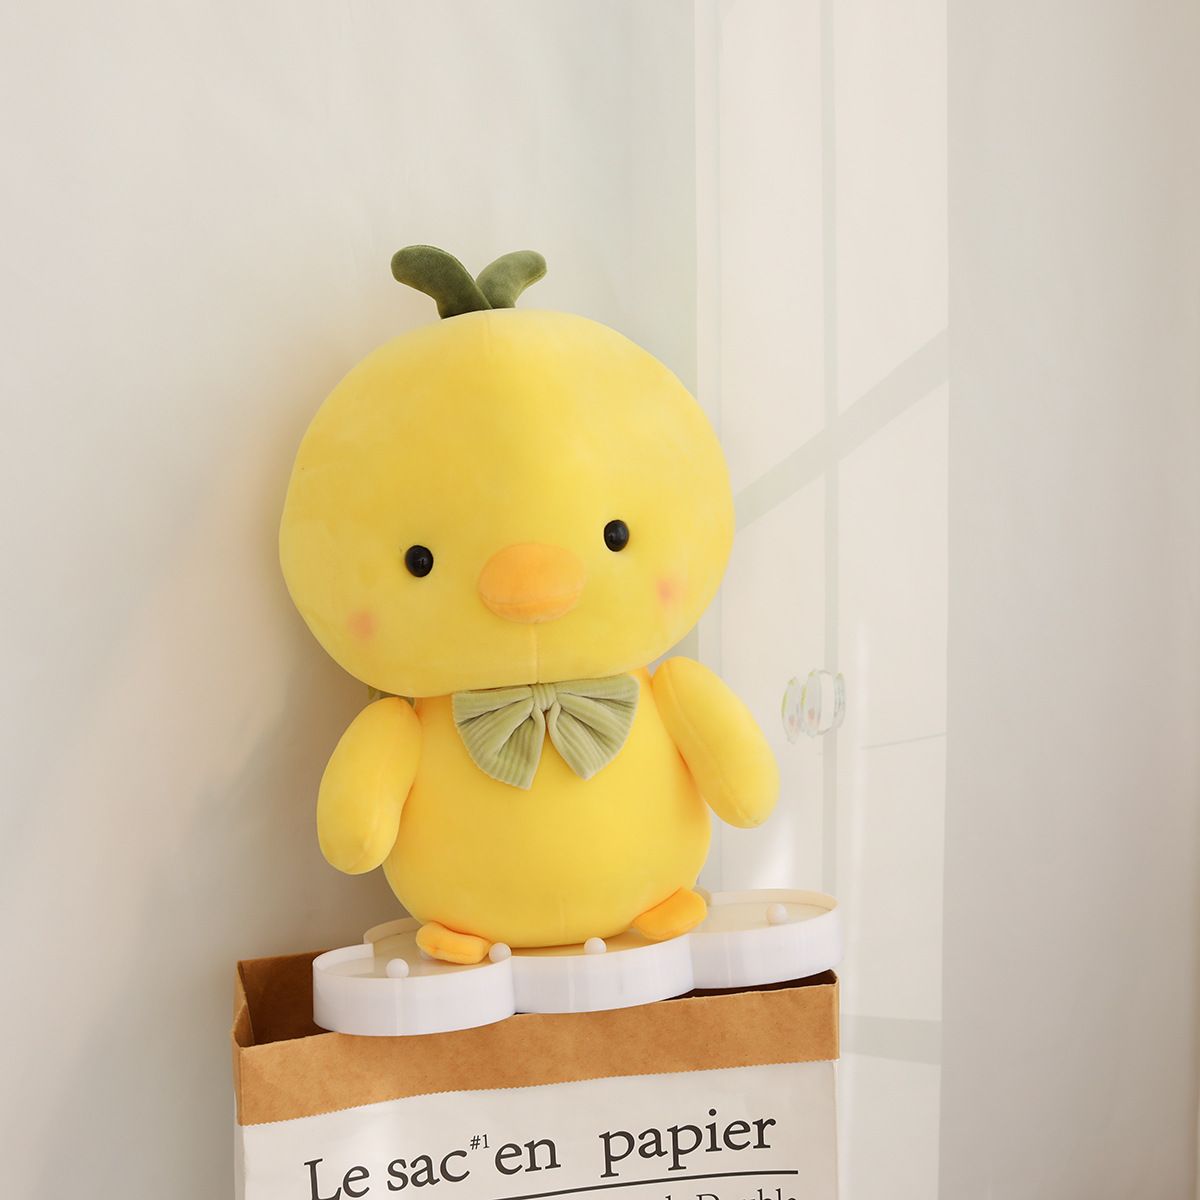 ZaRoing Small Yellow Chicken Figurine Big Fat Chicken Yellow Chick Cute Plush Toy Pillow Home Bedroom